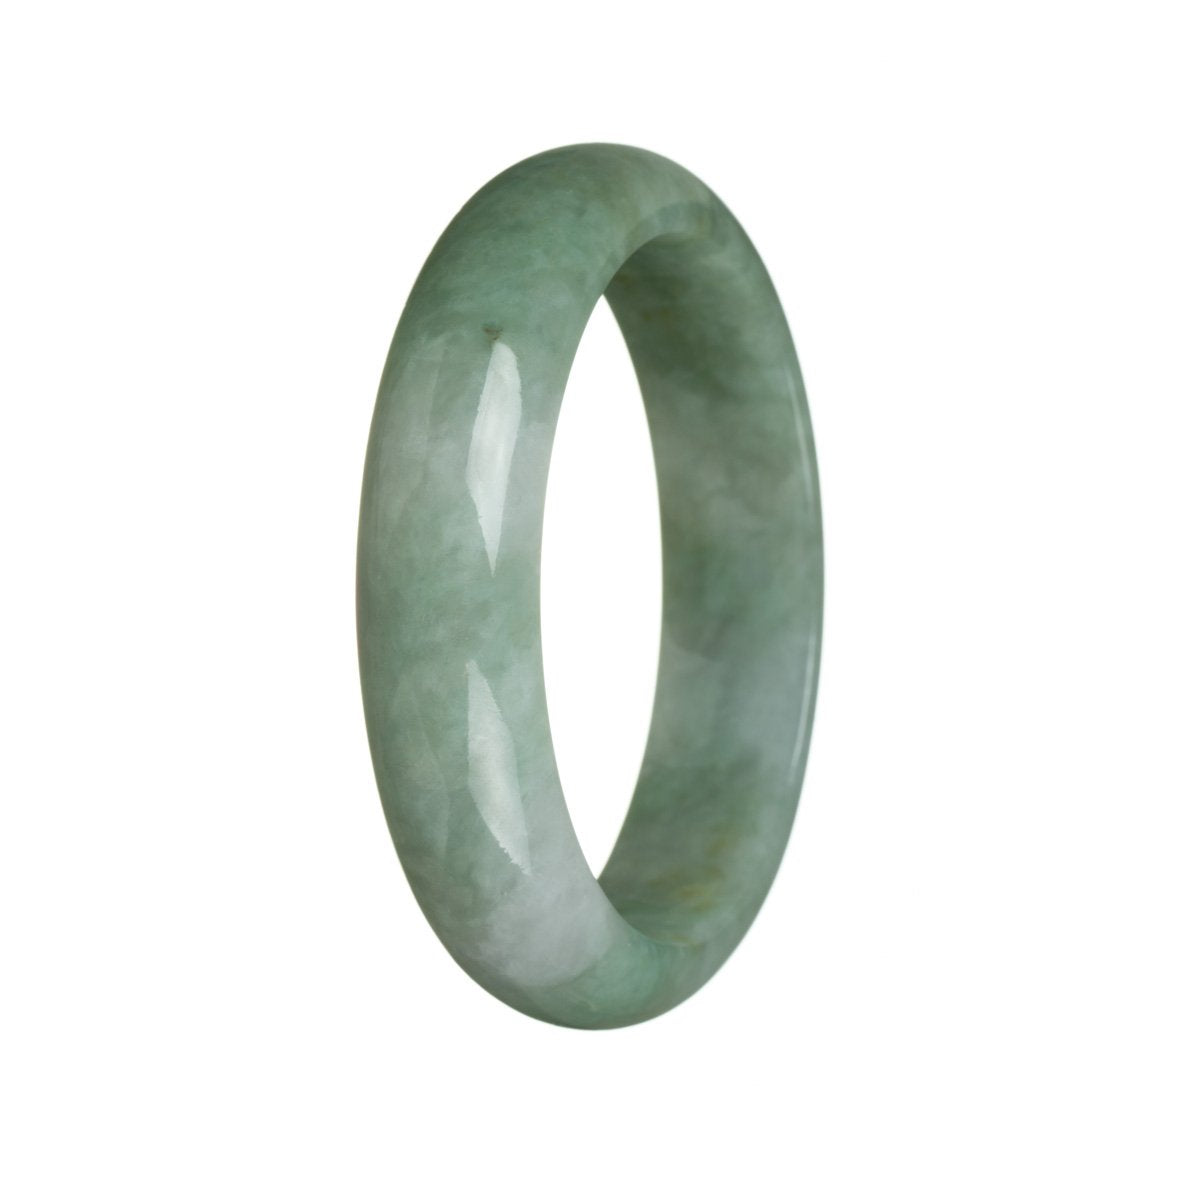 A close-up photo of a beautiful green jade bangle with a half-moon shape, measuring 62mm in diameter. The bangle is made of Grade A certified green Burma jade, known for its high quality and vibrant color. It is a stunning piece of jewelry that exudes elegance and sophistication.